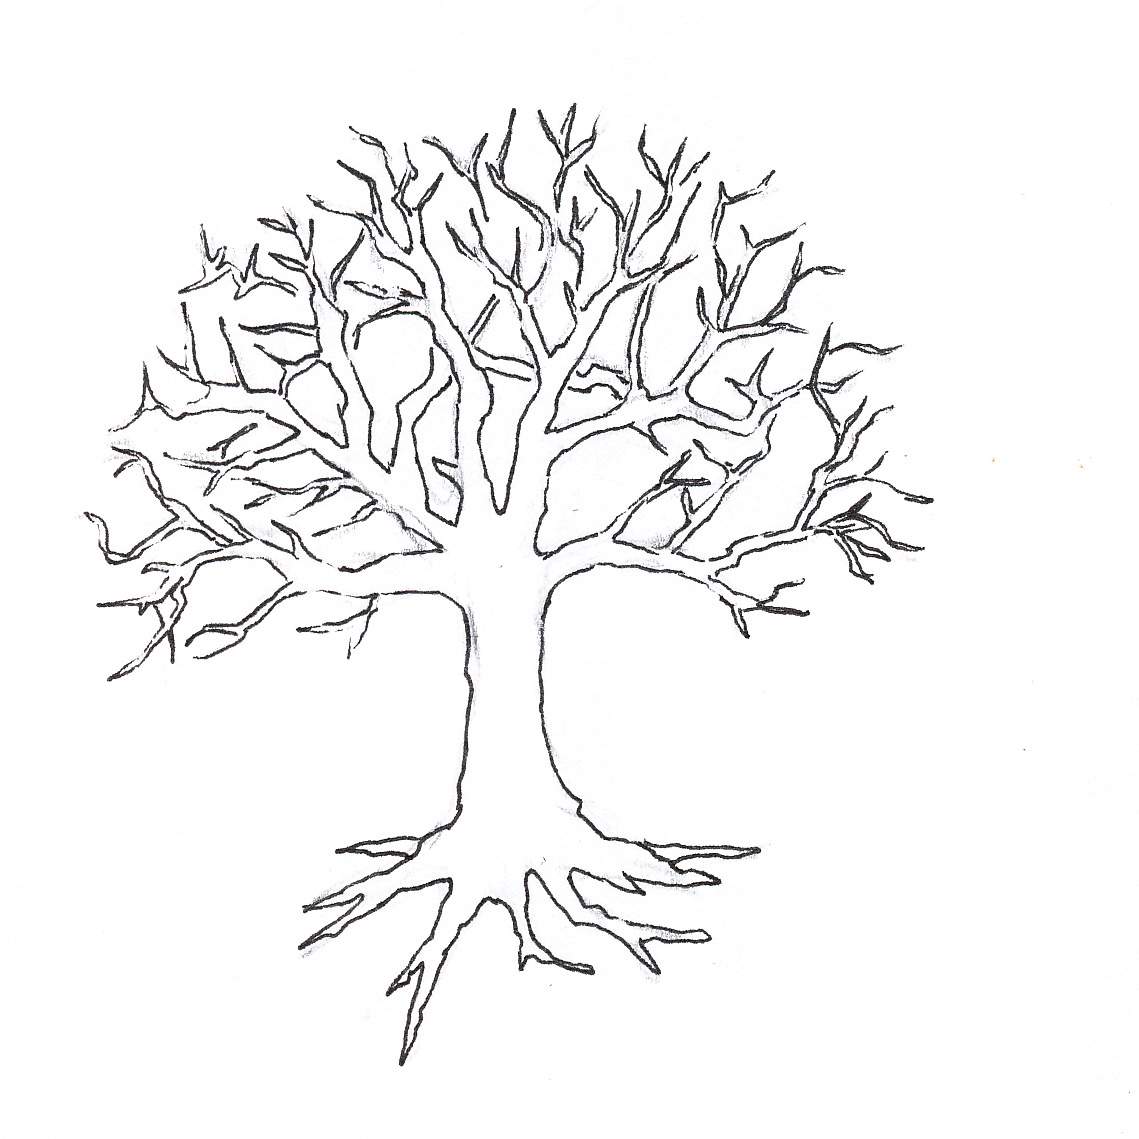 Free Leafless Tree Outline Printable, Download Free Leafless Tree